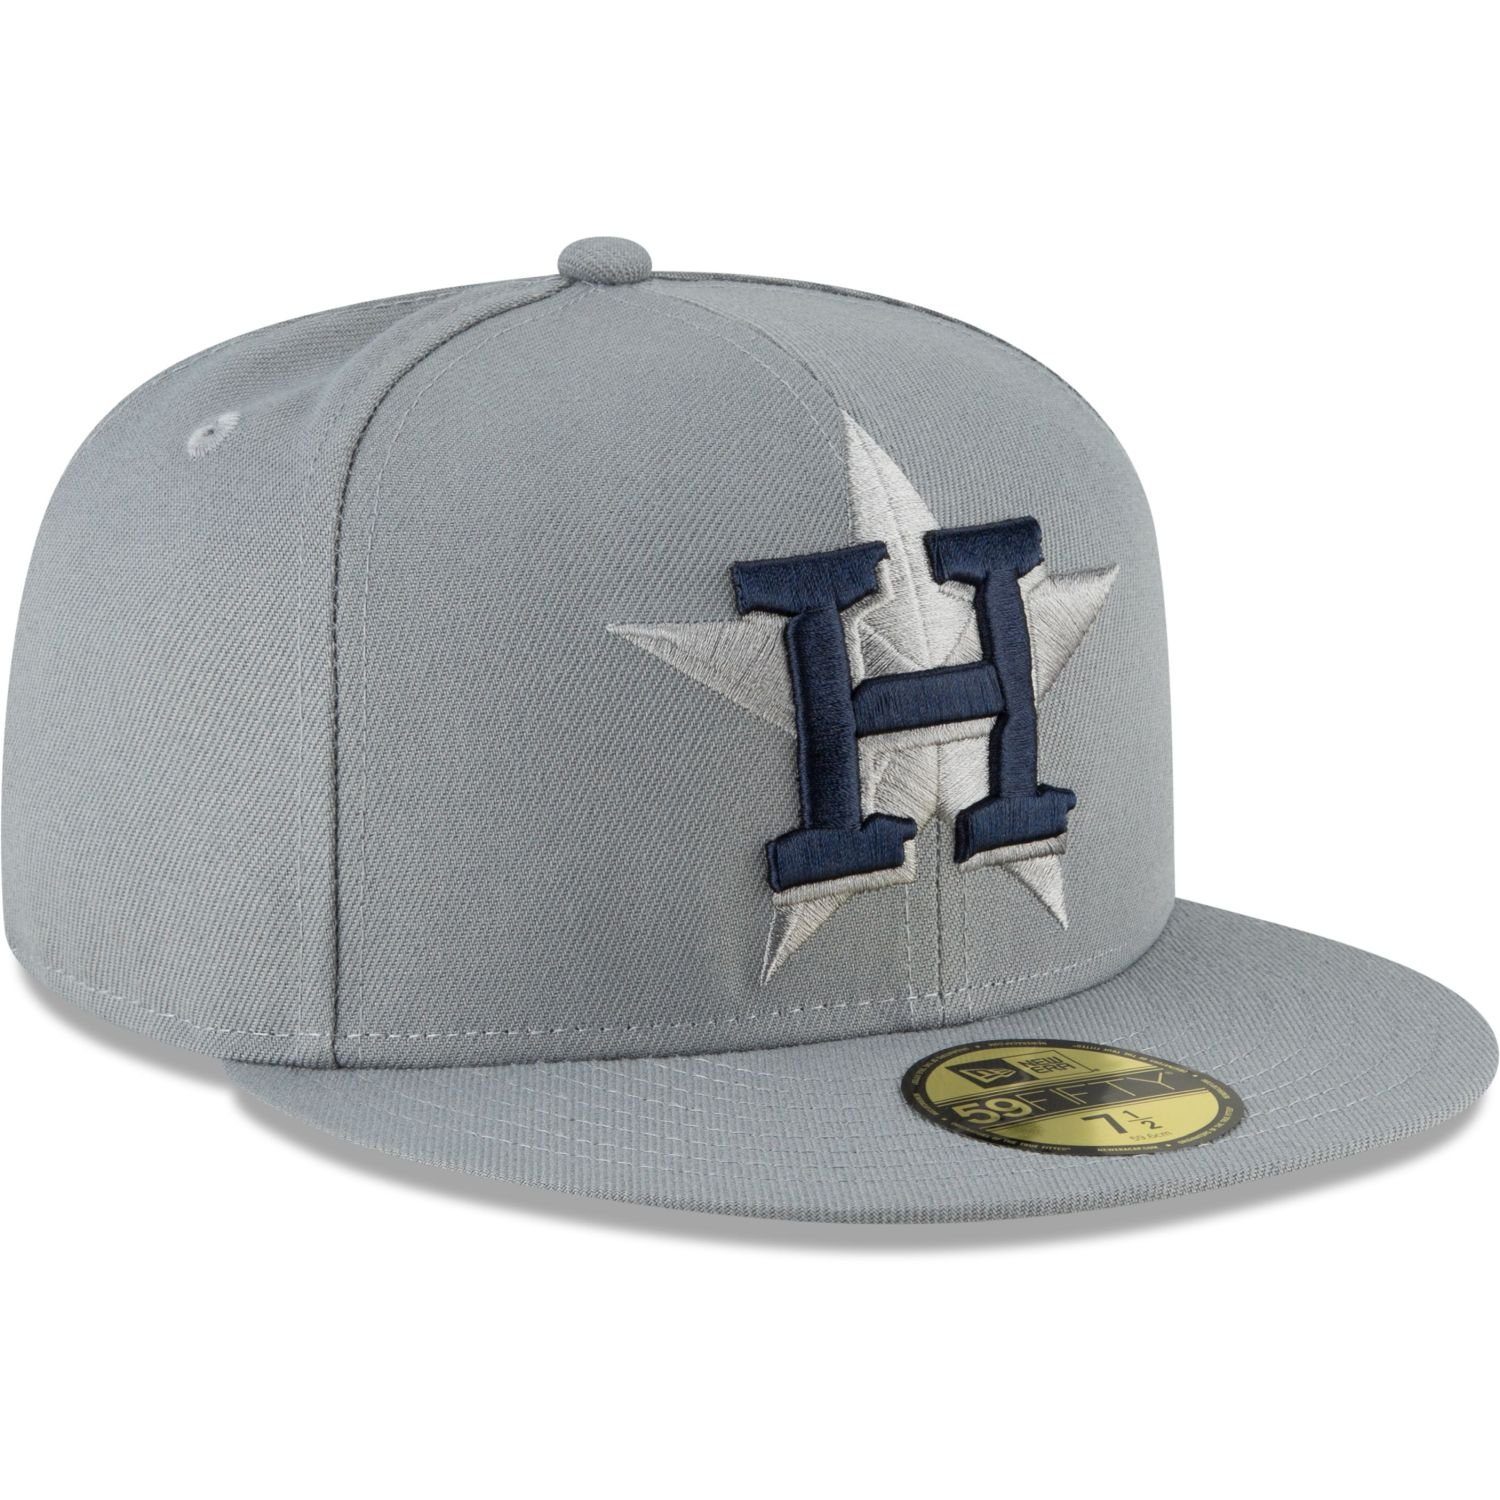 GREY 59Fifty Cooperstown Cap Fitted Team New MLB Astros Era STORM Houston